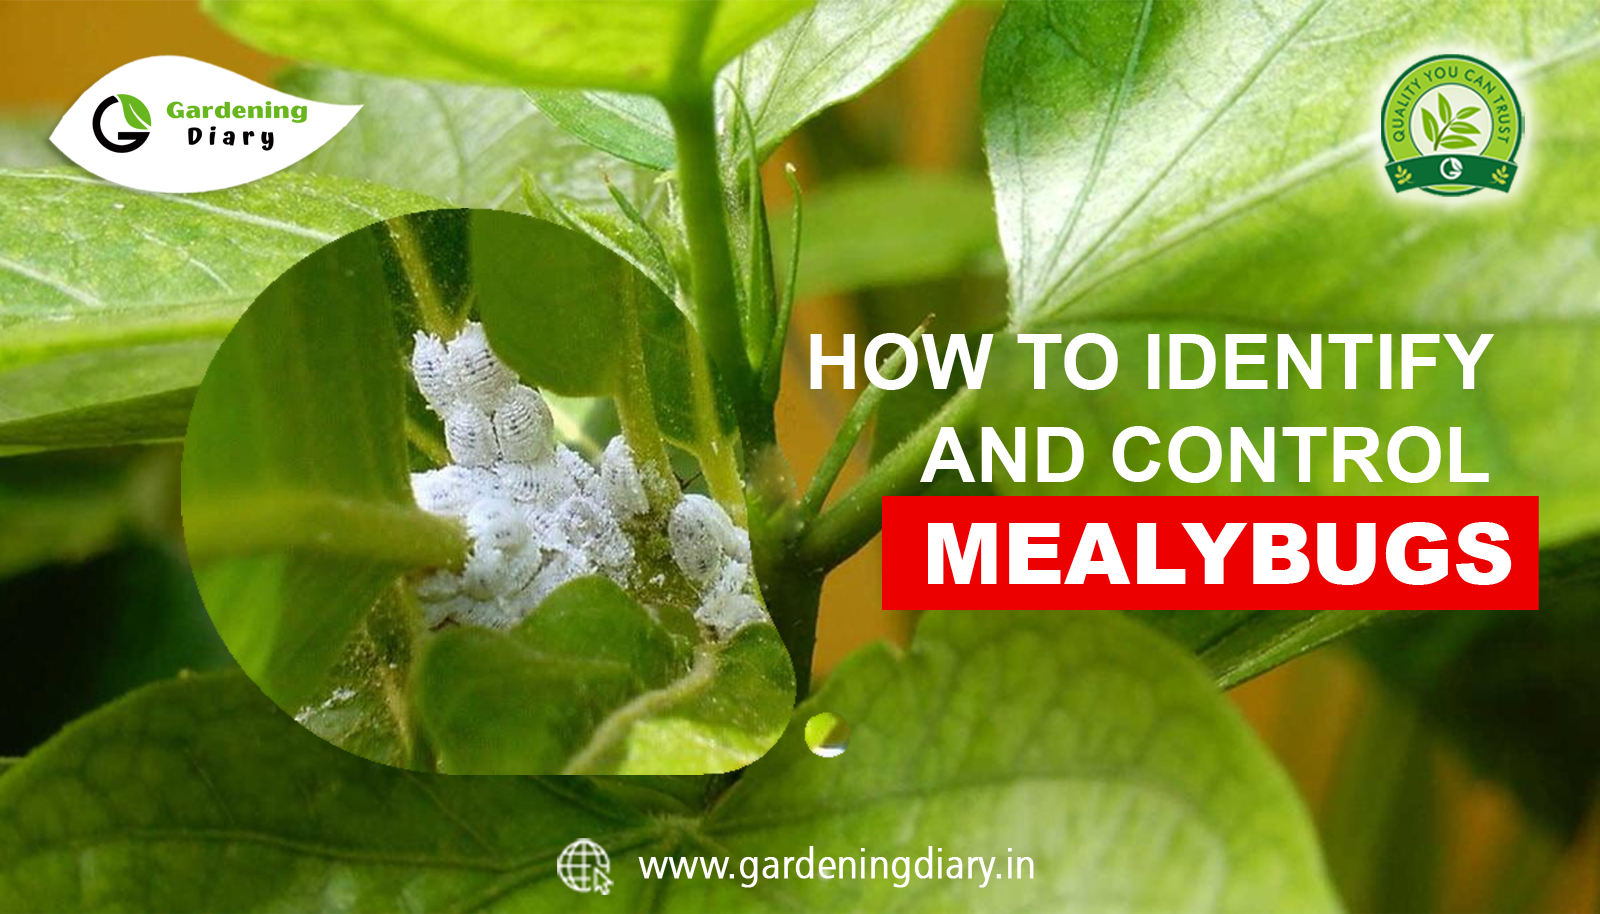 HOW TO IDENTIFY AND CONTROL MEALYBUGS